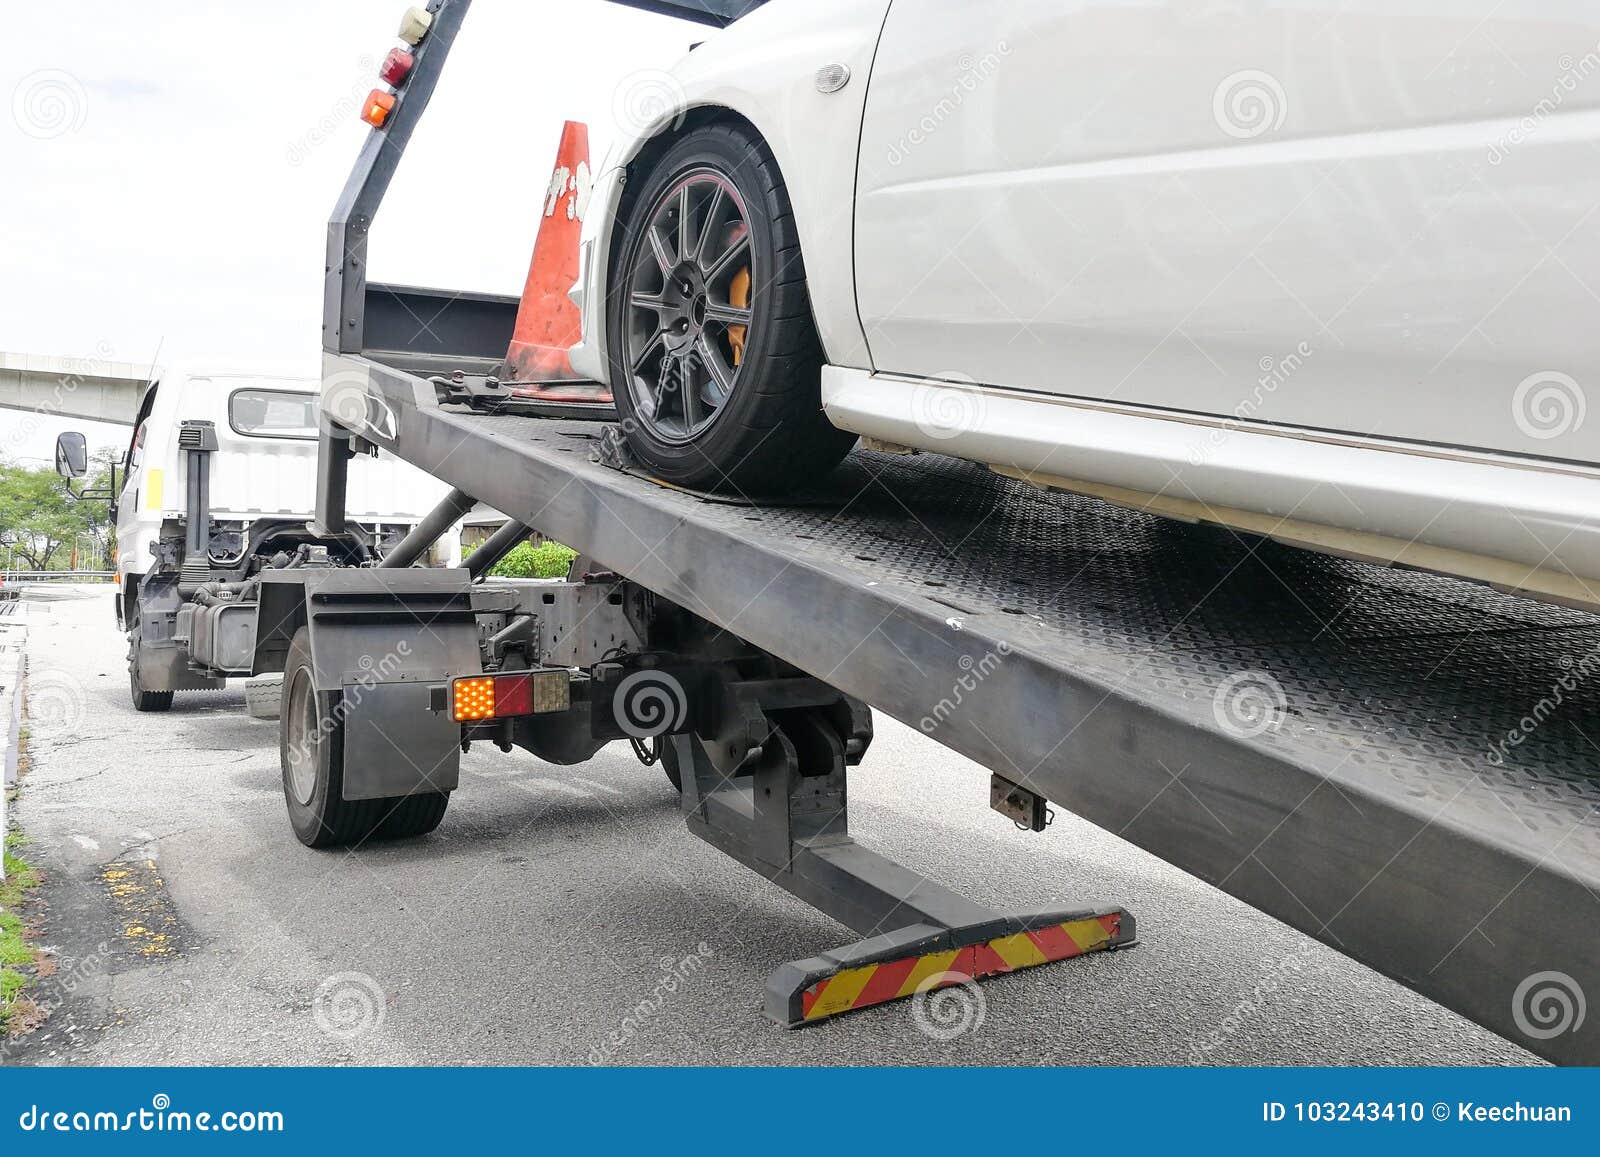 https://thumbs.dreamstime.com/z/broken-down-auto-vehicle-car-towed-onto-flatbed-tow-truck-hook-chain-car-towed-onto-flatbed-tow-truck-hook-chain-103243410.jpg